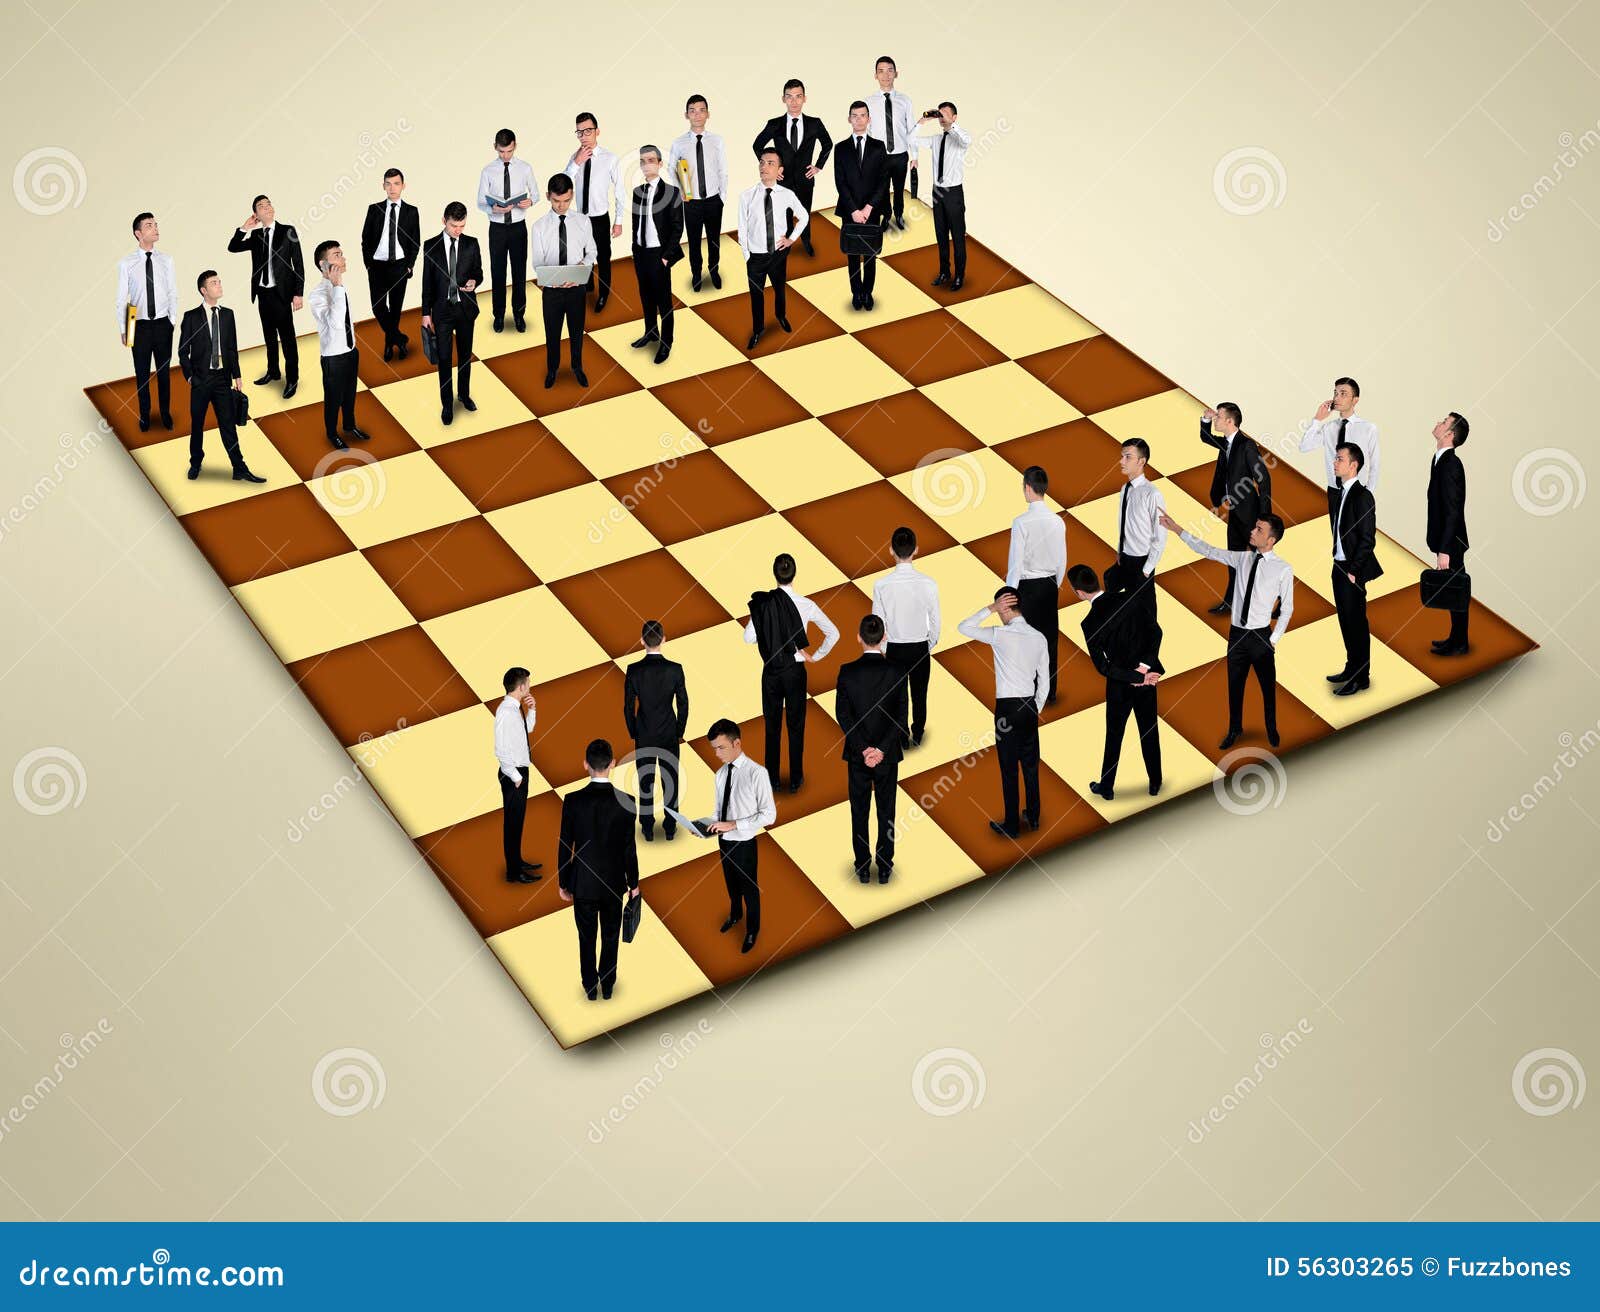 Chess board stock image. Image of leader, leadership - 56303265